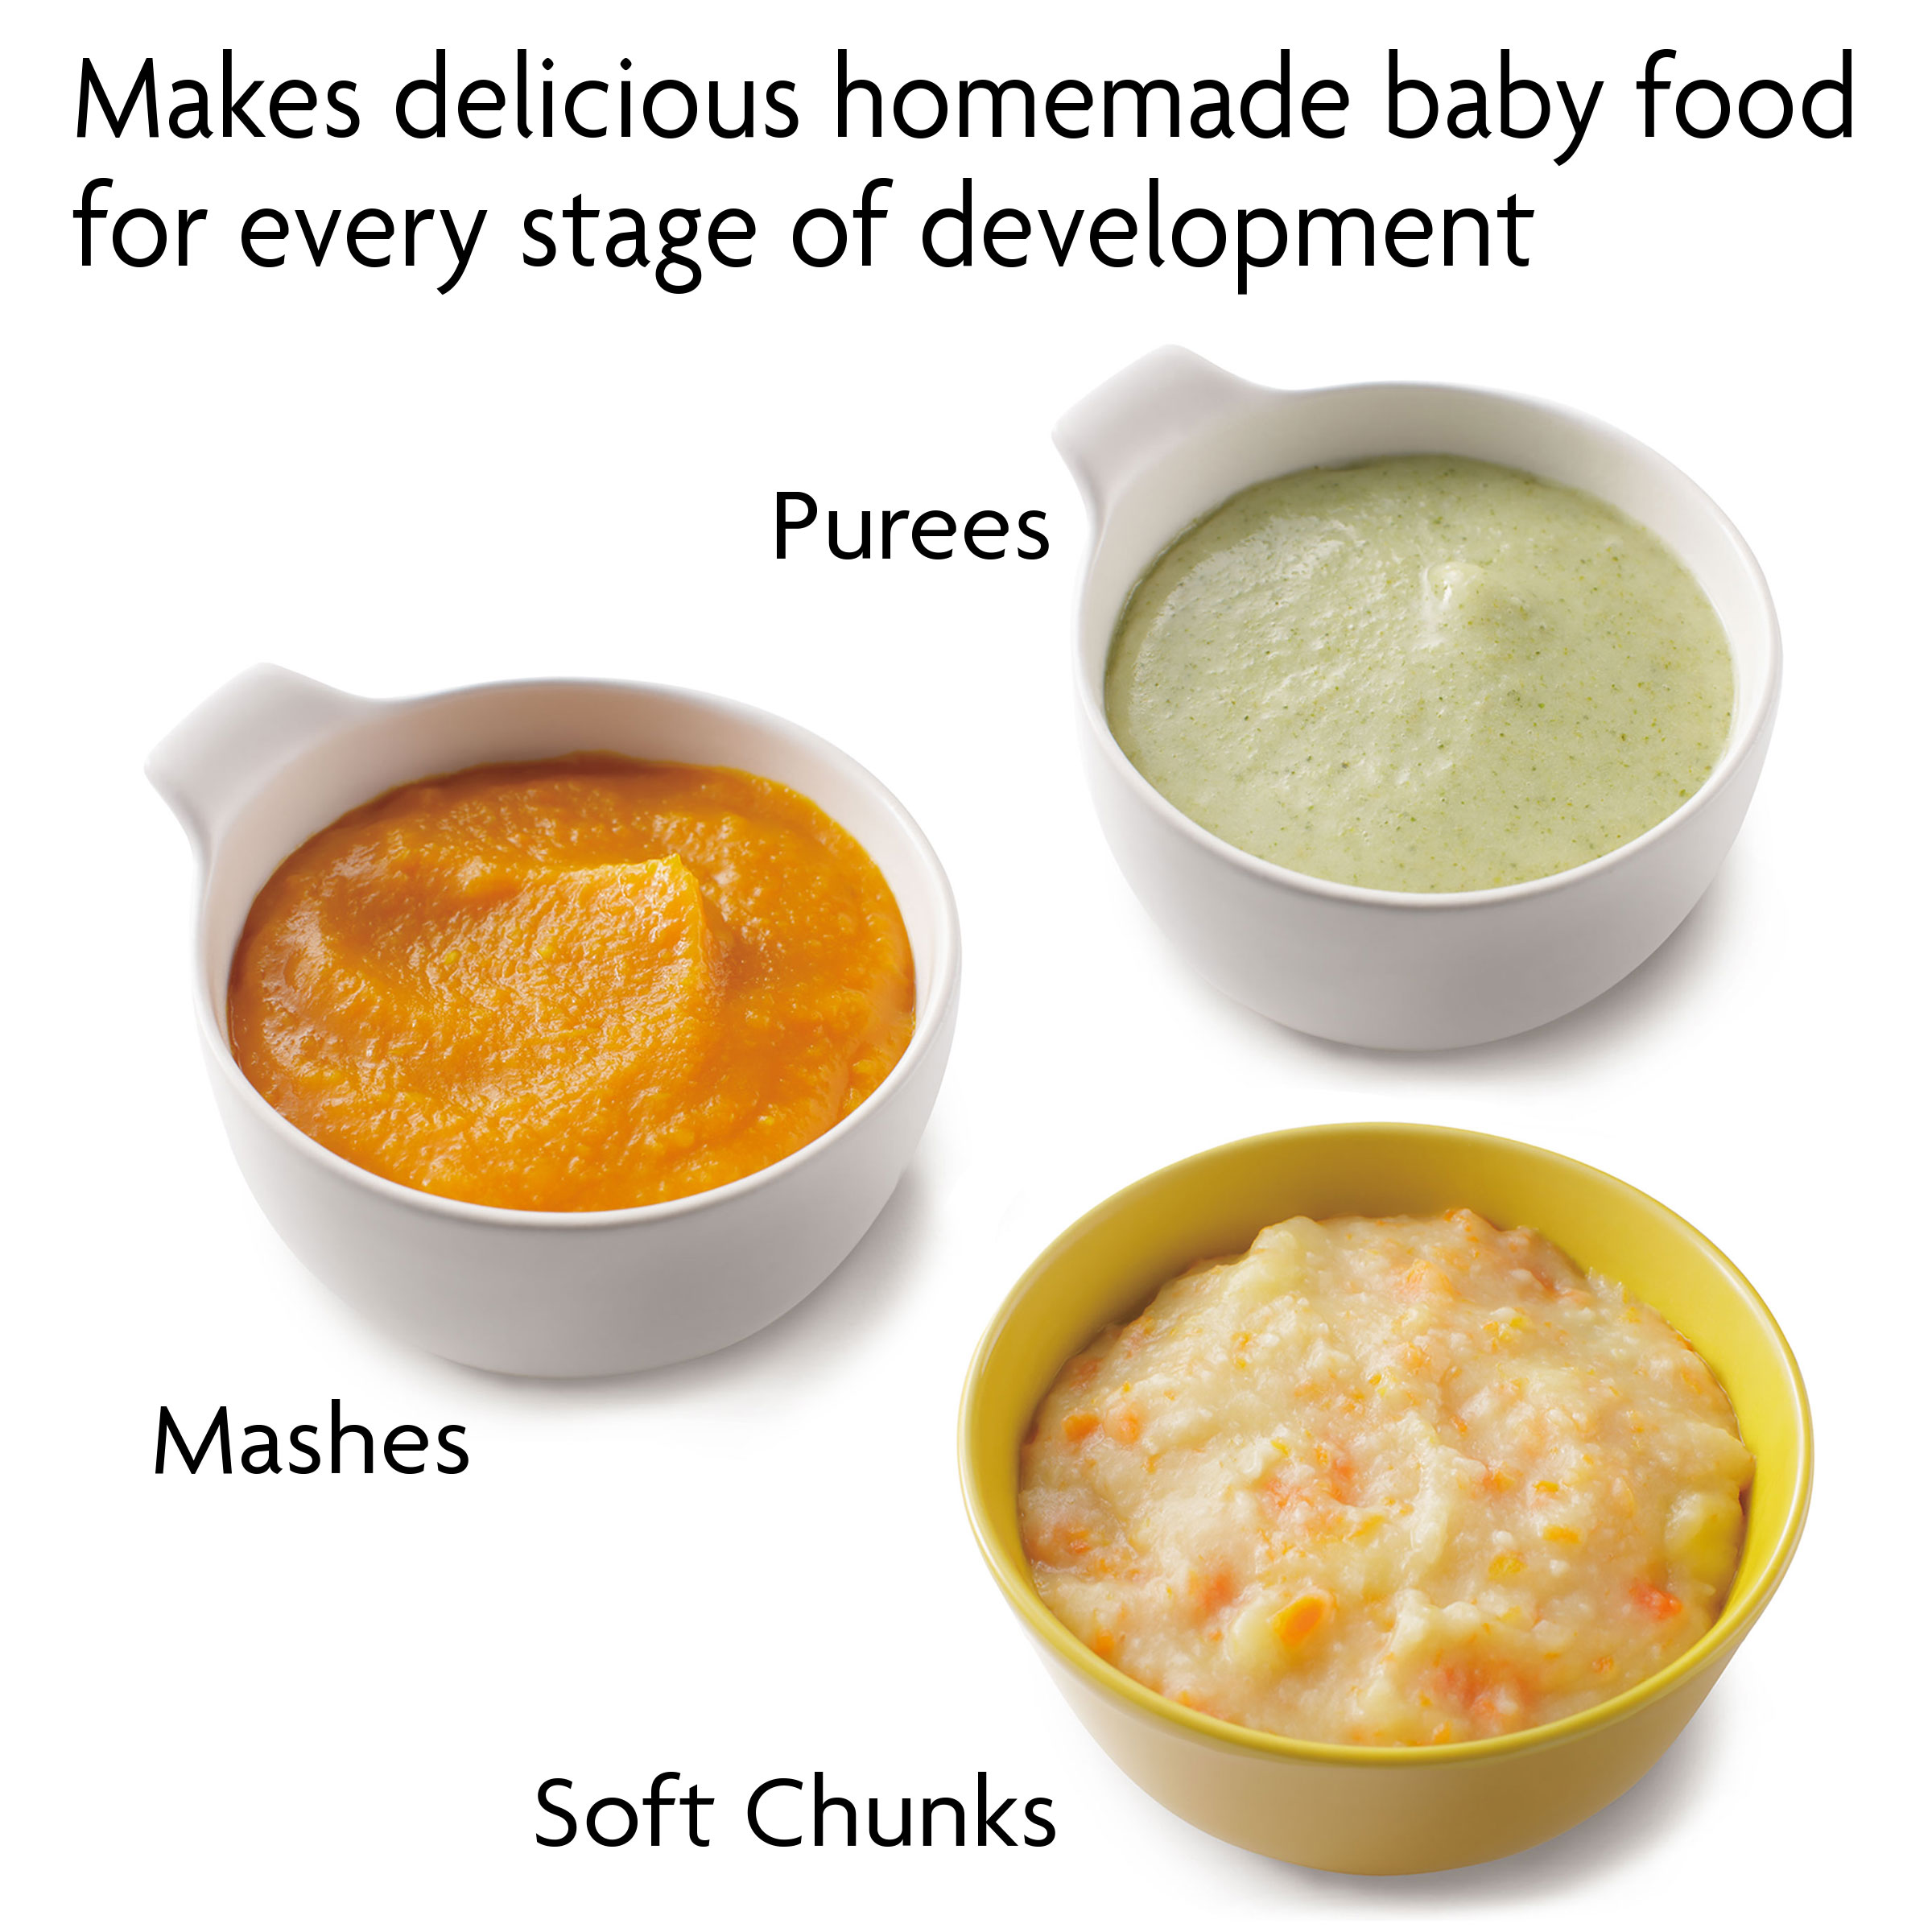 Baby Brezza Glass Baby Food Maker Cooker and Blender to Steams in Glass Bowl - 4 Cup Capacity Glass Food Maker - image 3 of 6